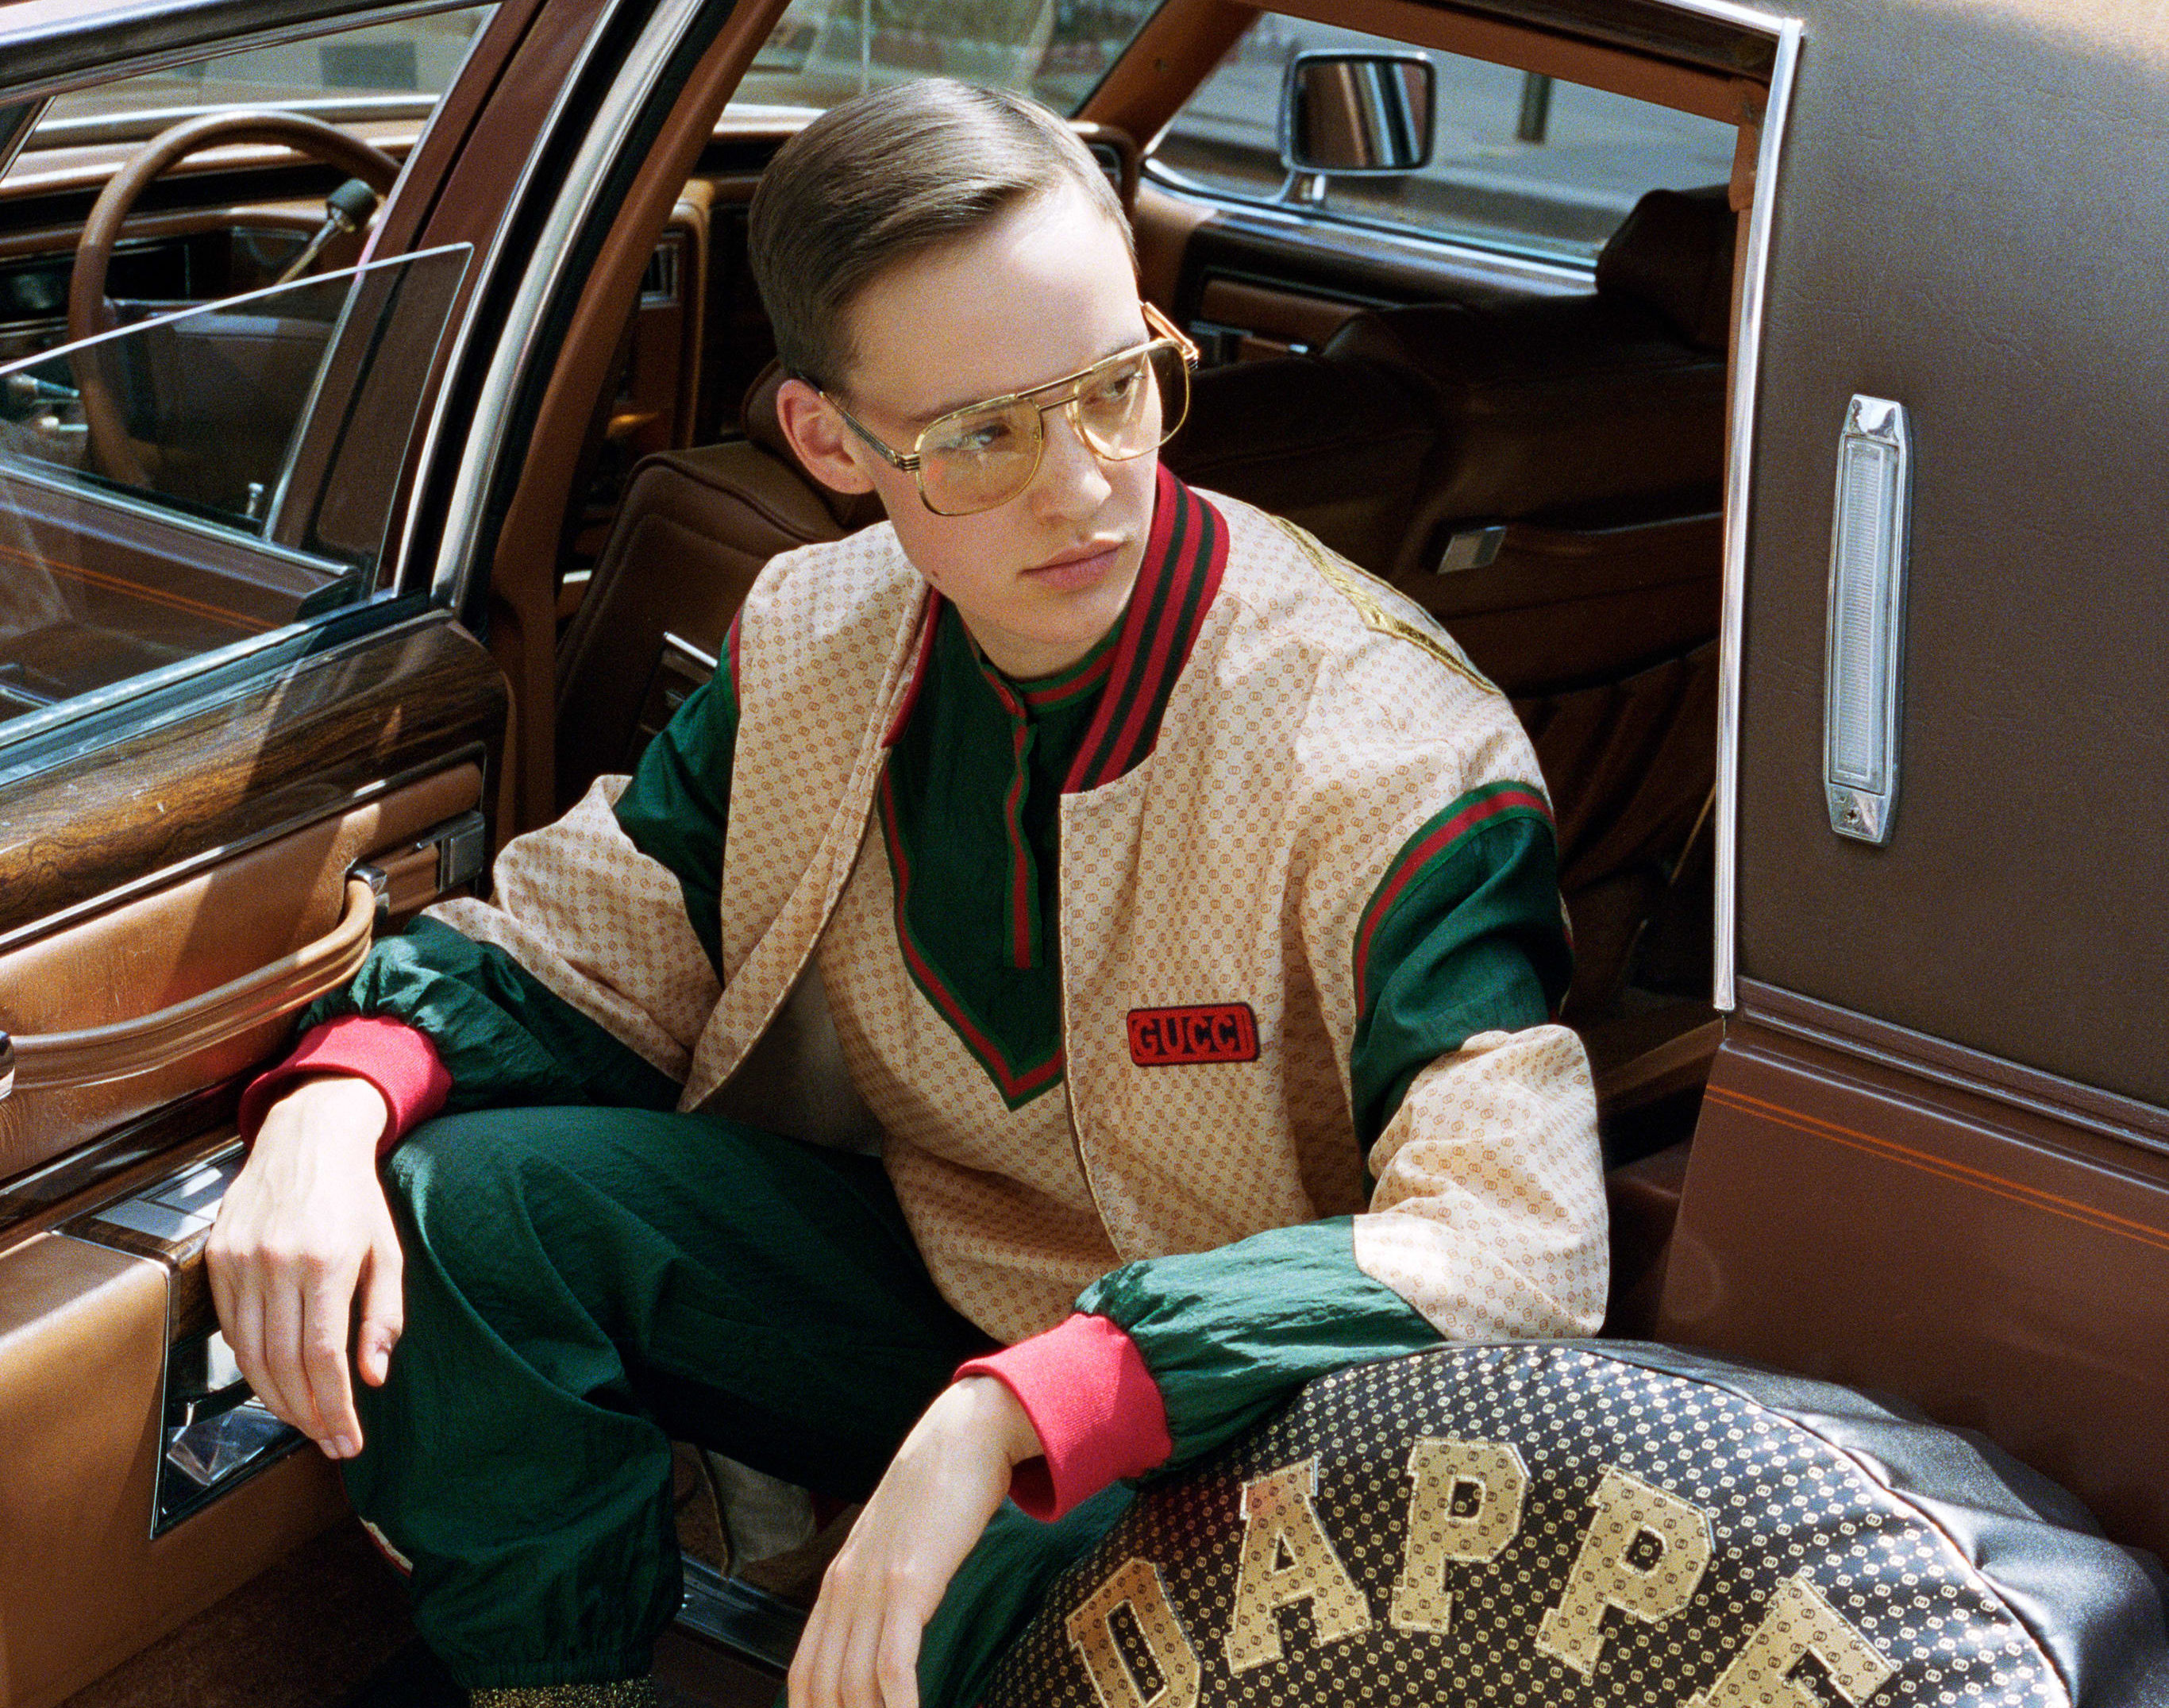 Gucci and Dapper Dan have dropped their first collection - I